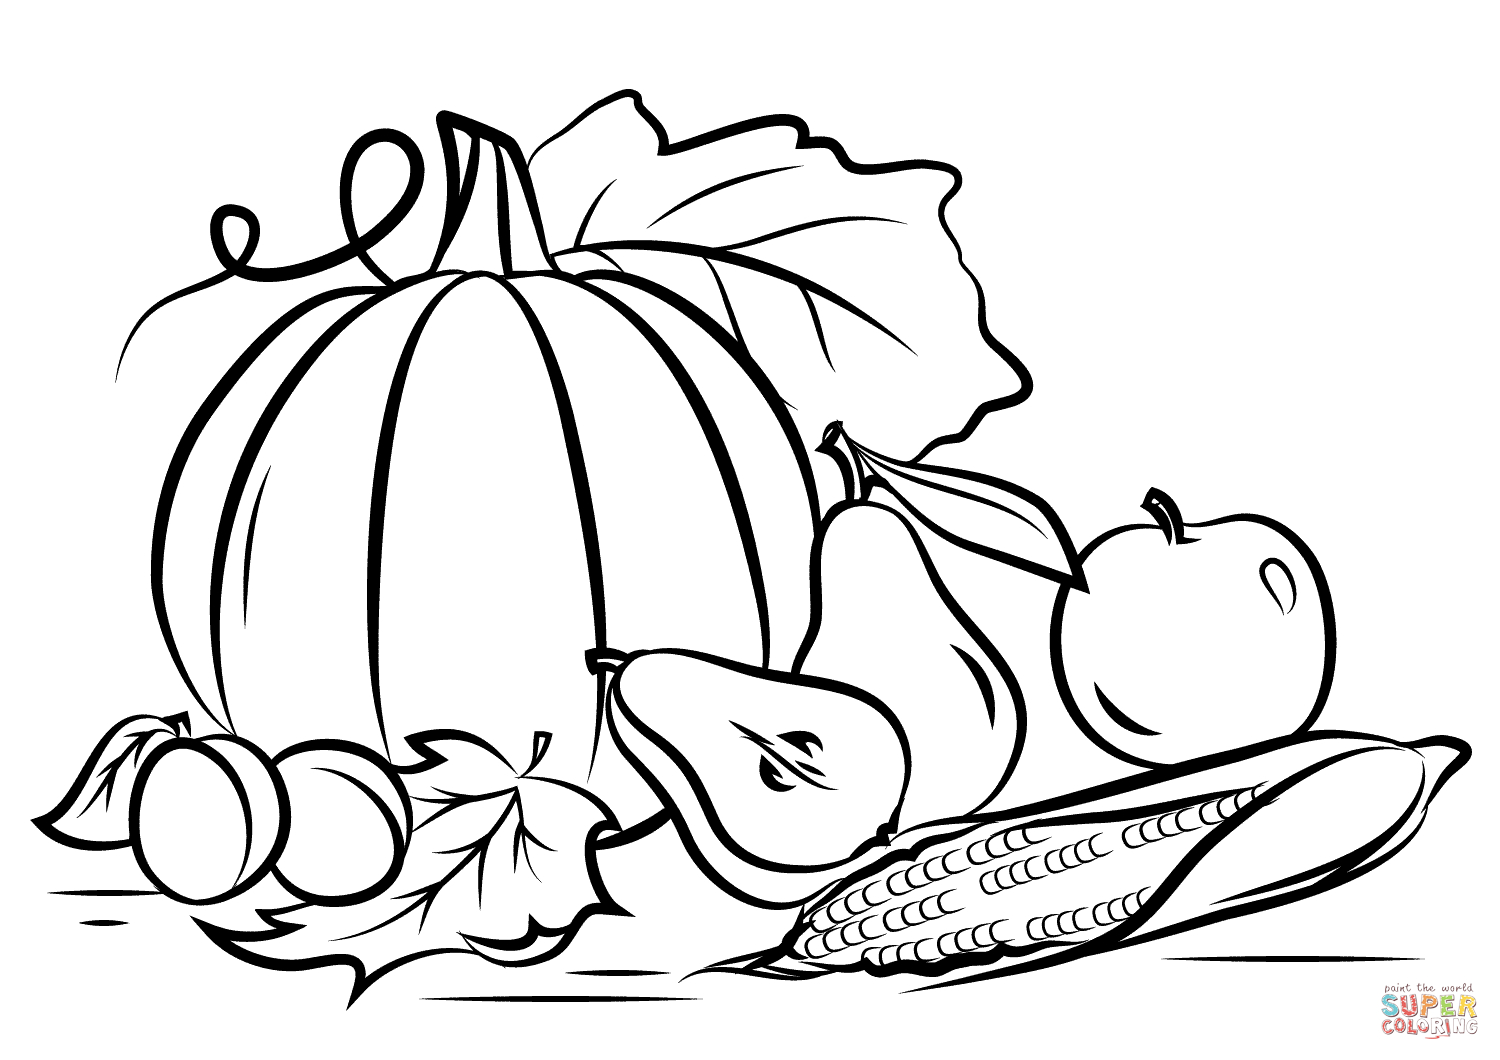 Fall Coloring Pages Free Autumn Harvest Coloring Page Free Printable Coloring Pages